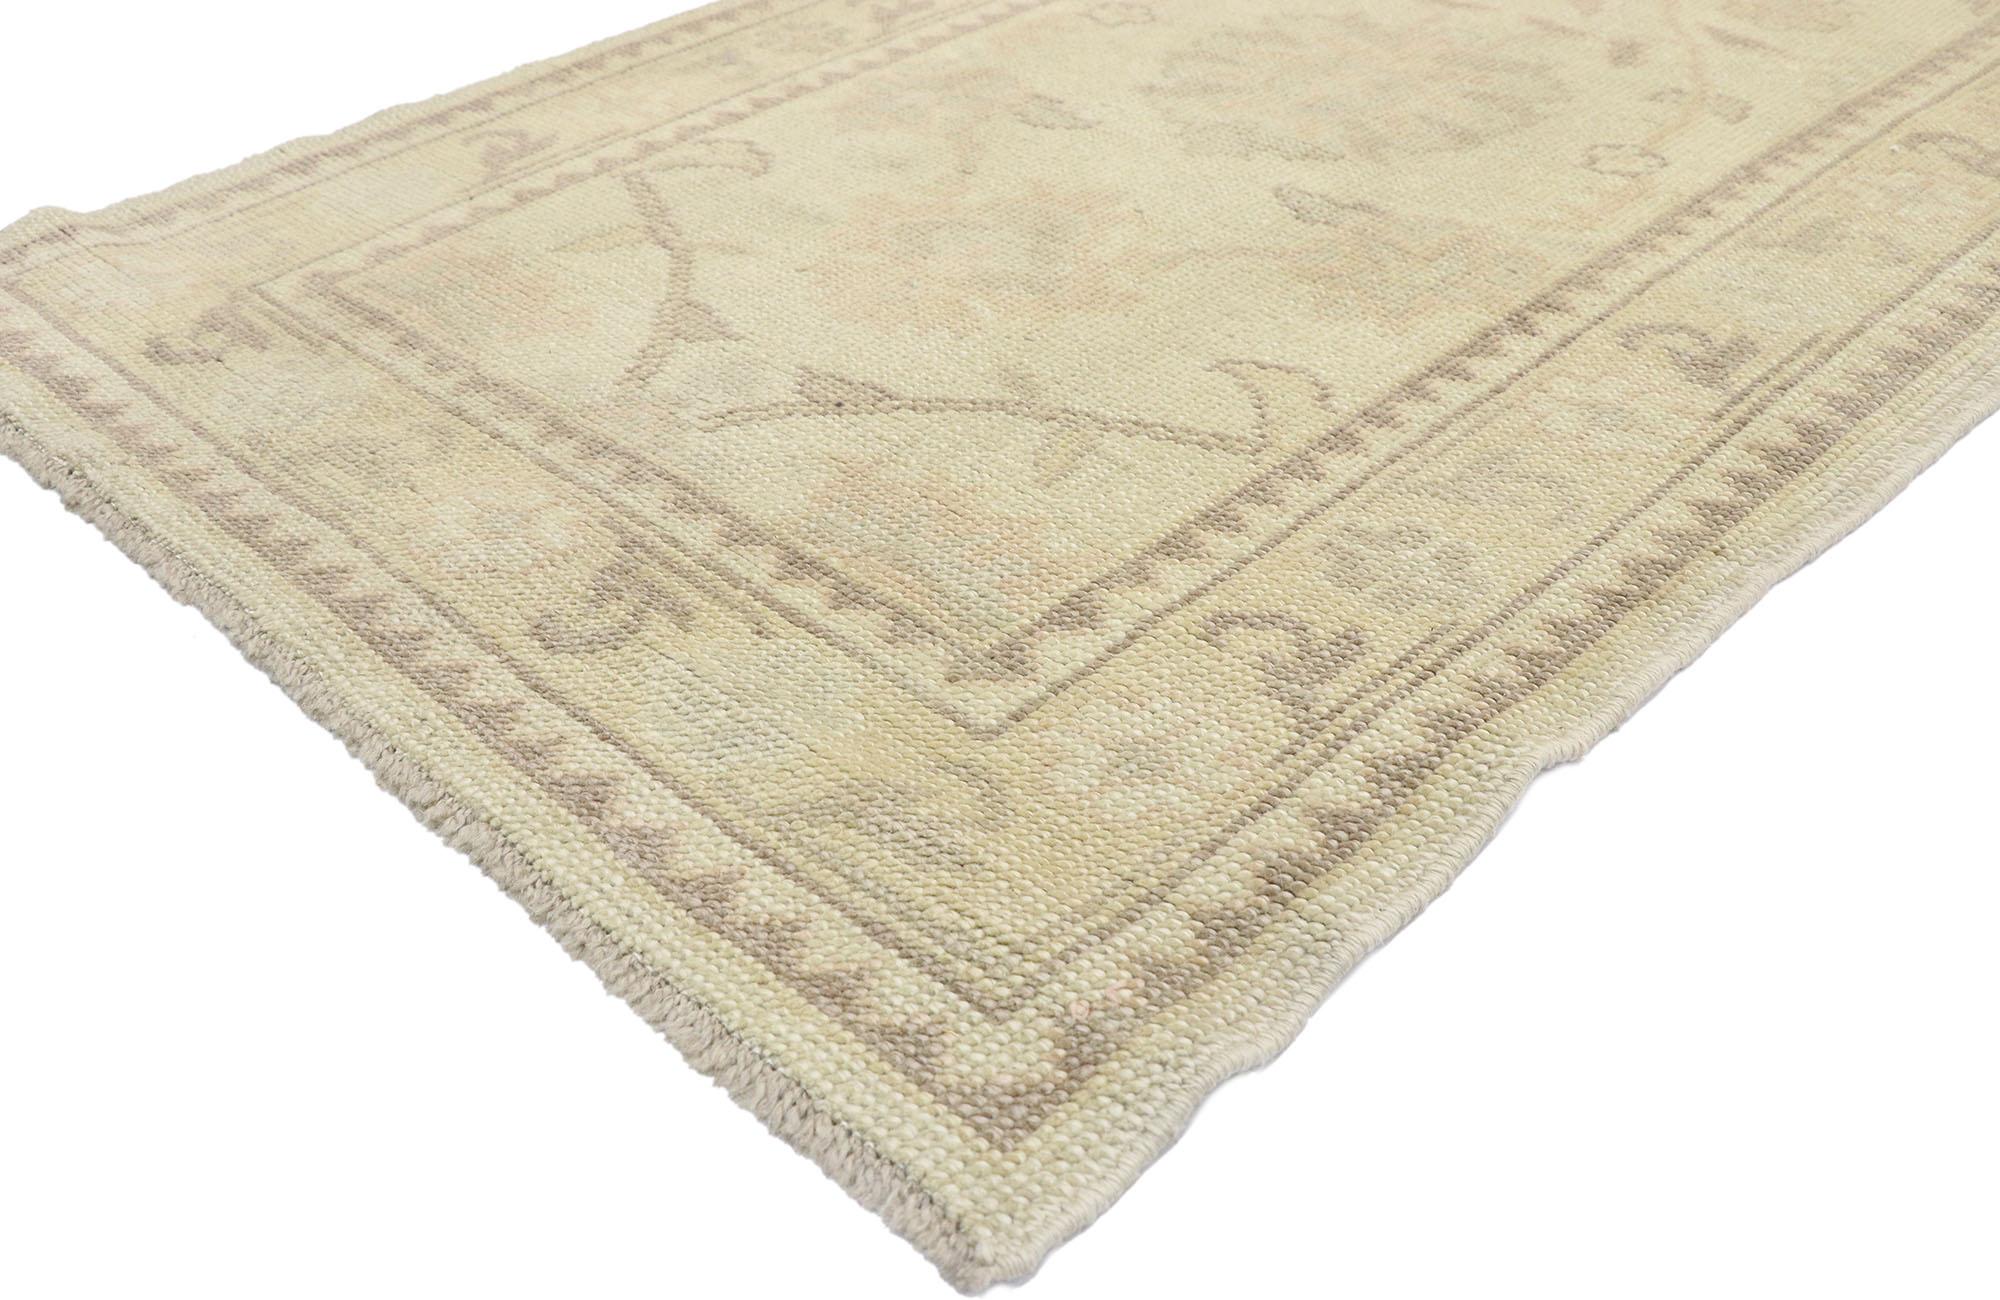 51621 New contemporary Turkish Oushak runner with modern transitional Style 03'00 x 13'00. Elegant simplicity meets transitional style in this hand-knotted wool contemporary Turkish Oushak runner. The abrashed field features an all-over botanical